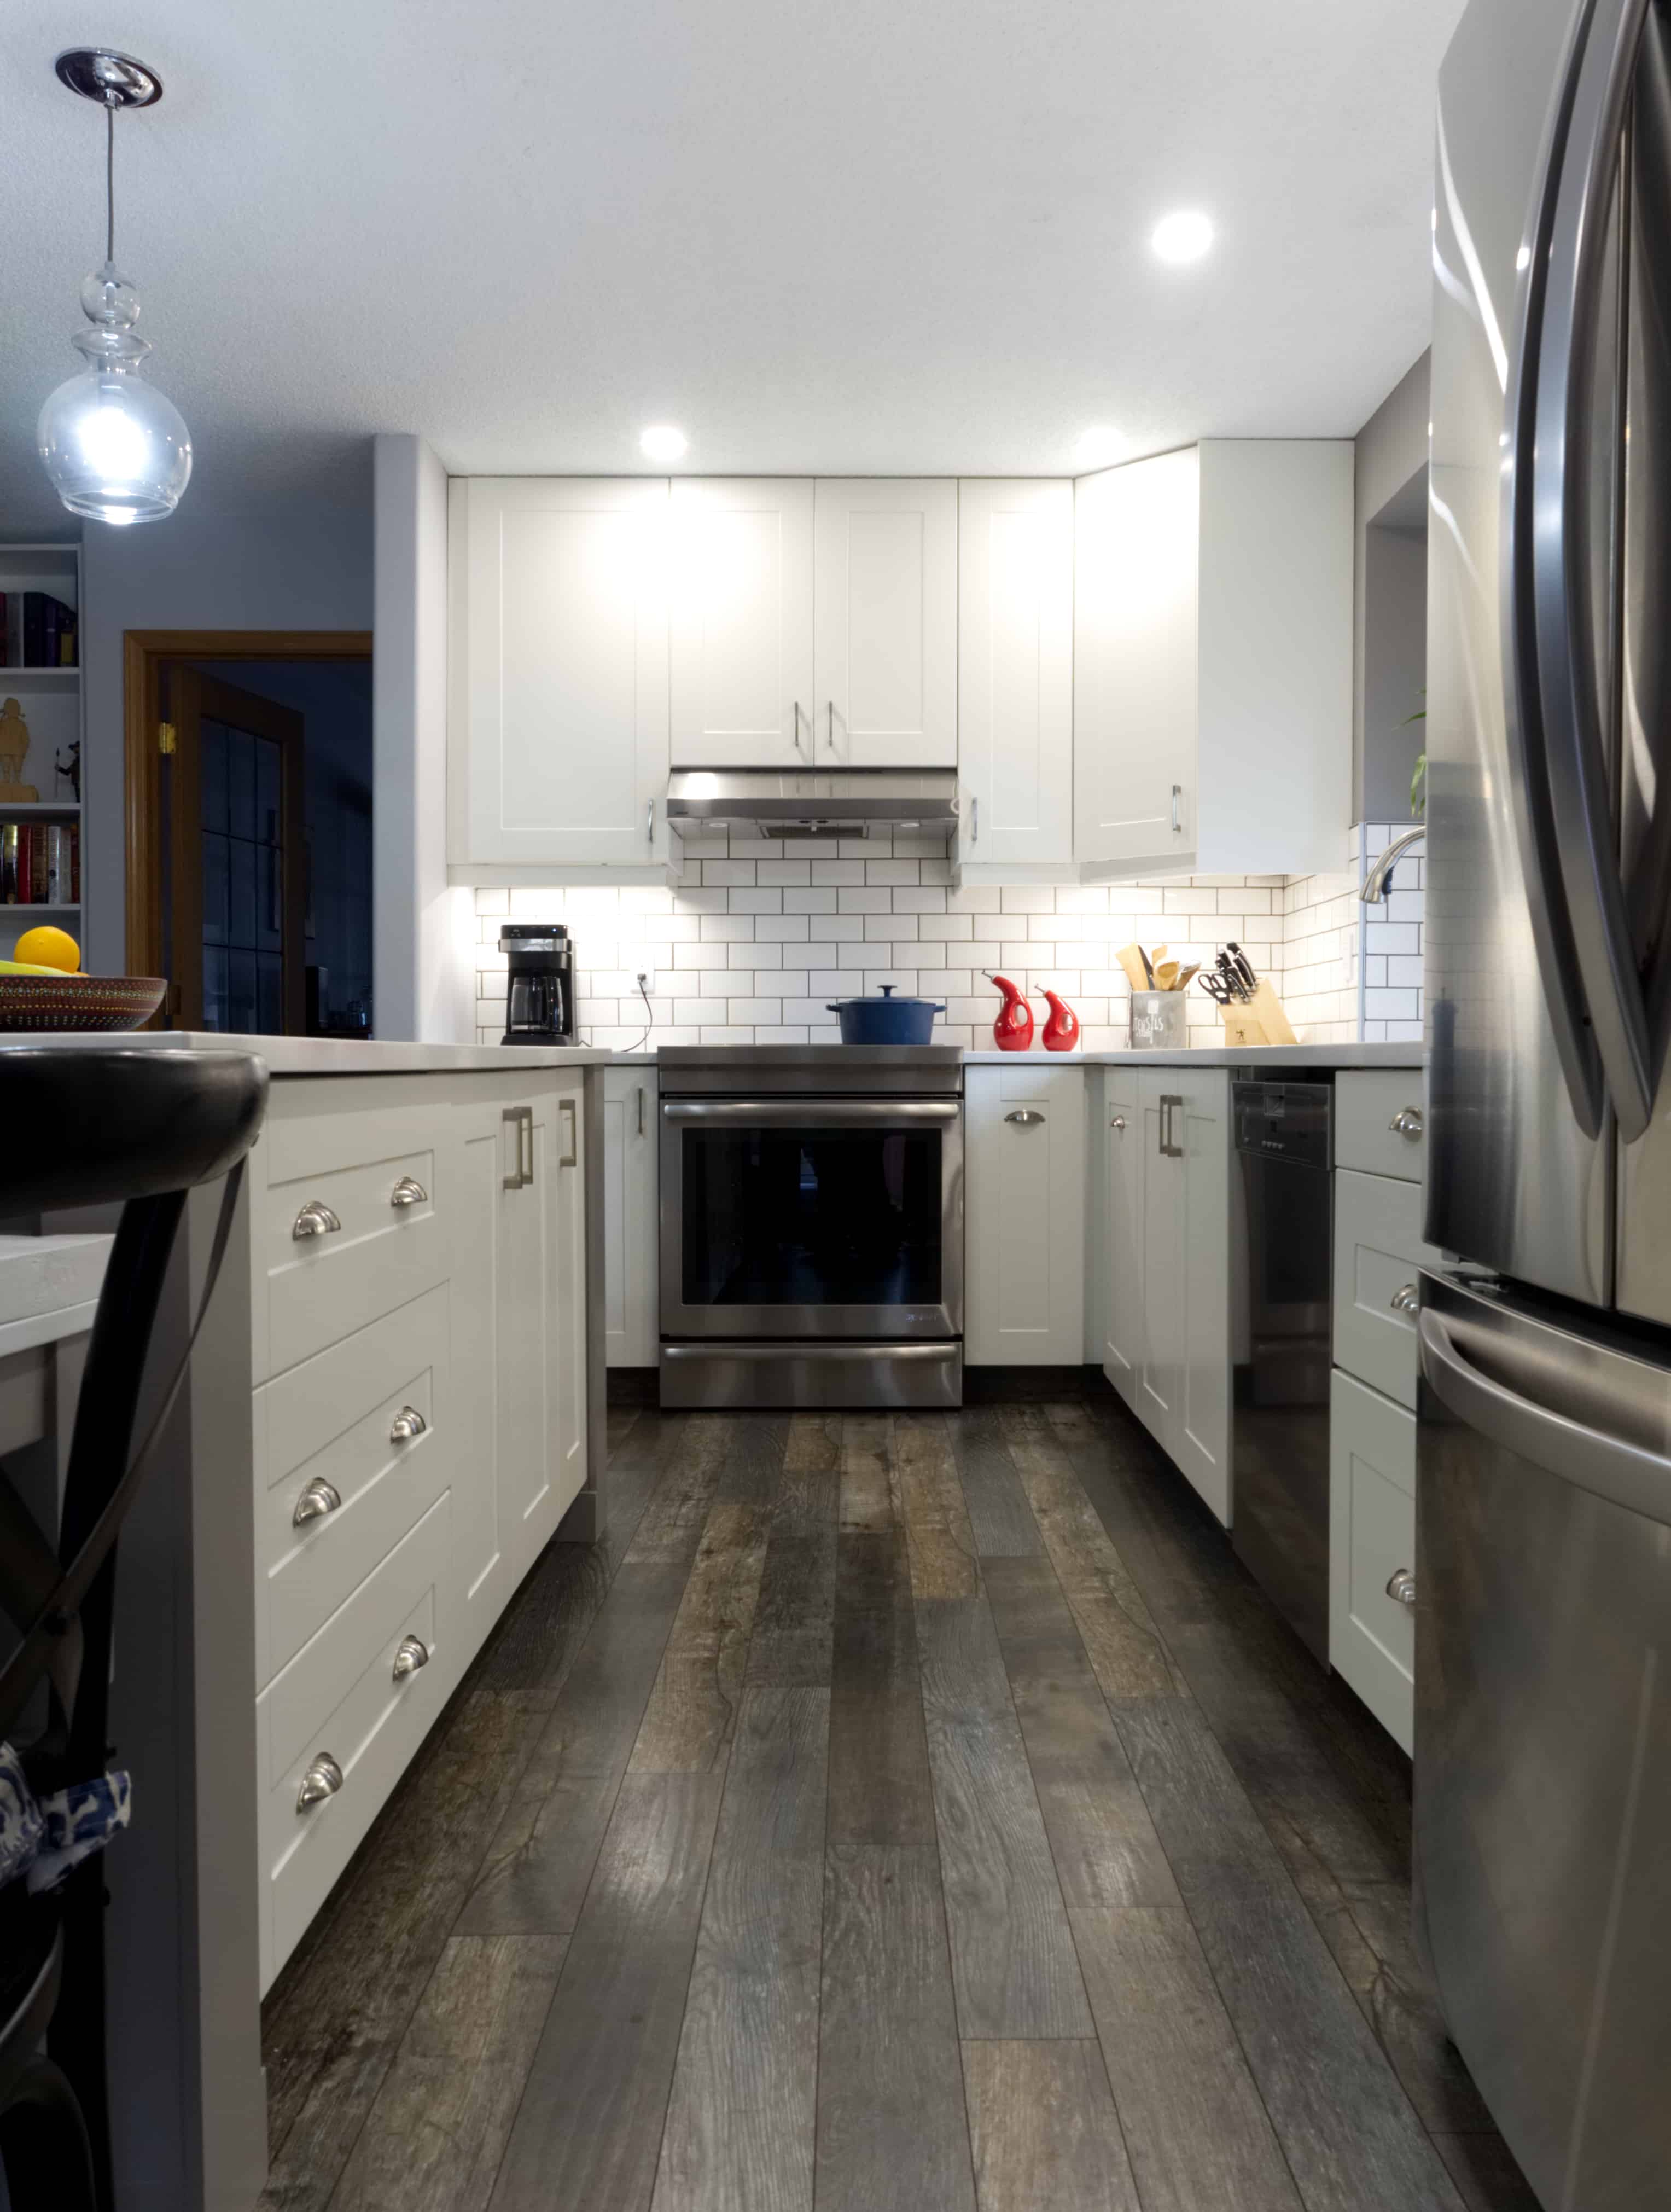 Ikea Kitchen Review Pros Cons And, Microwave Cabinet Ikea Canada